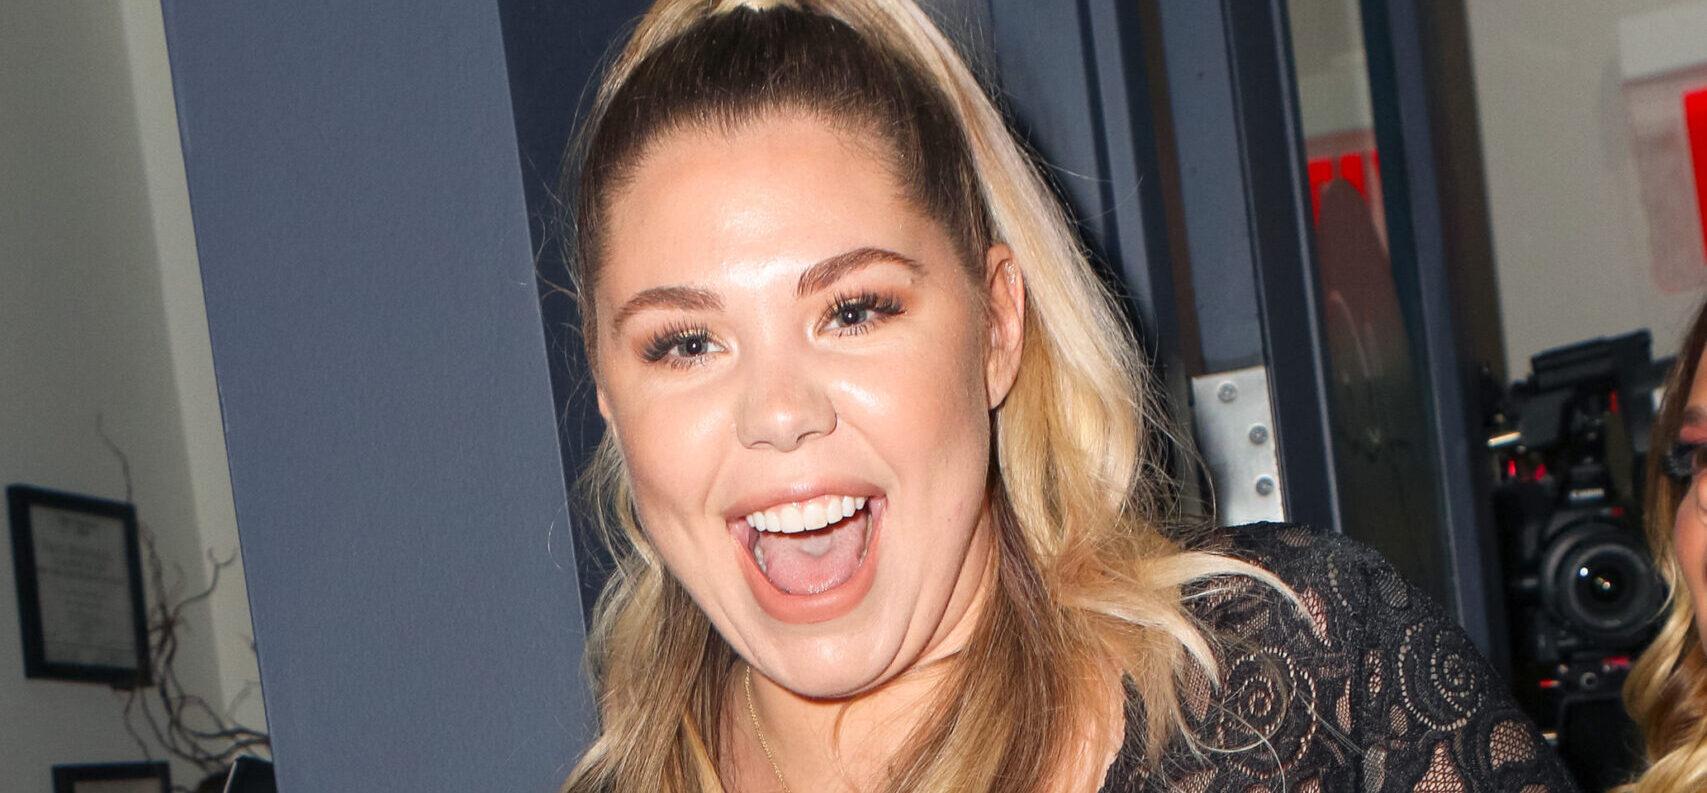 Baby 6 and 7 On The Way For ‘Teen Mom’ Alum Kailyn Lowry!